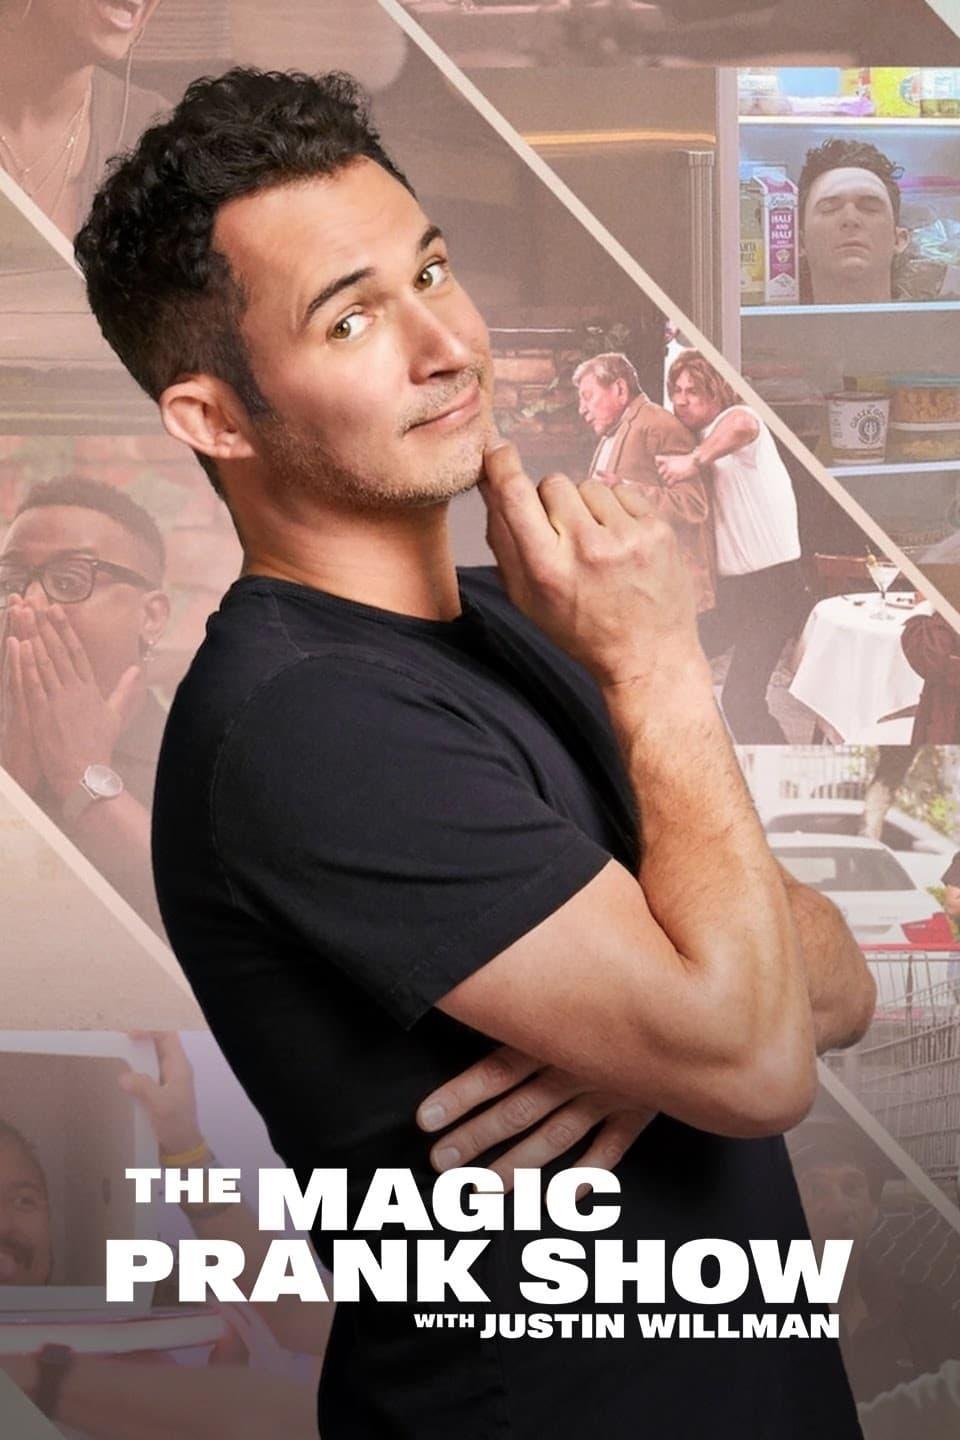 THE MAGIC PRANK SHOW with Justin Willman poster